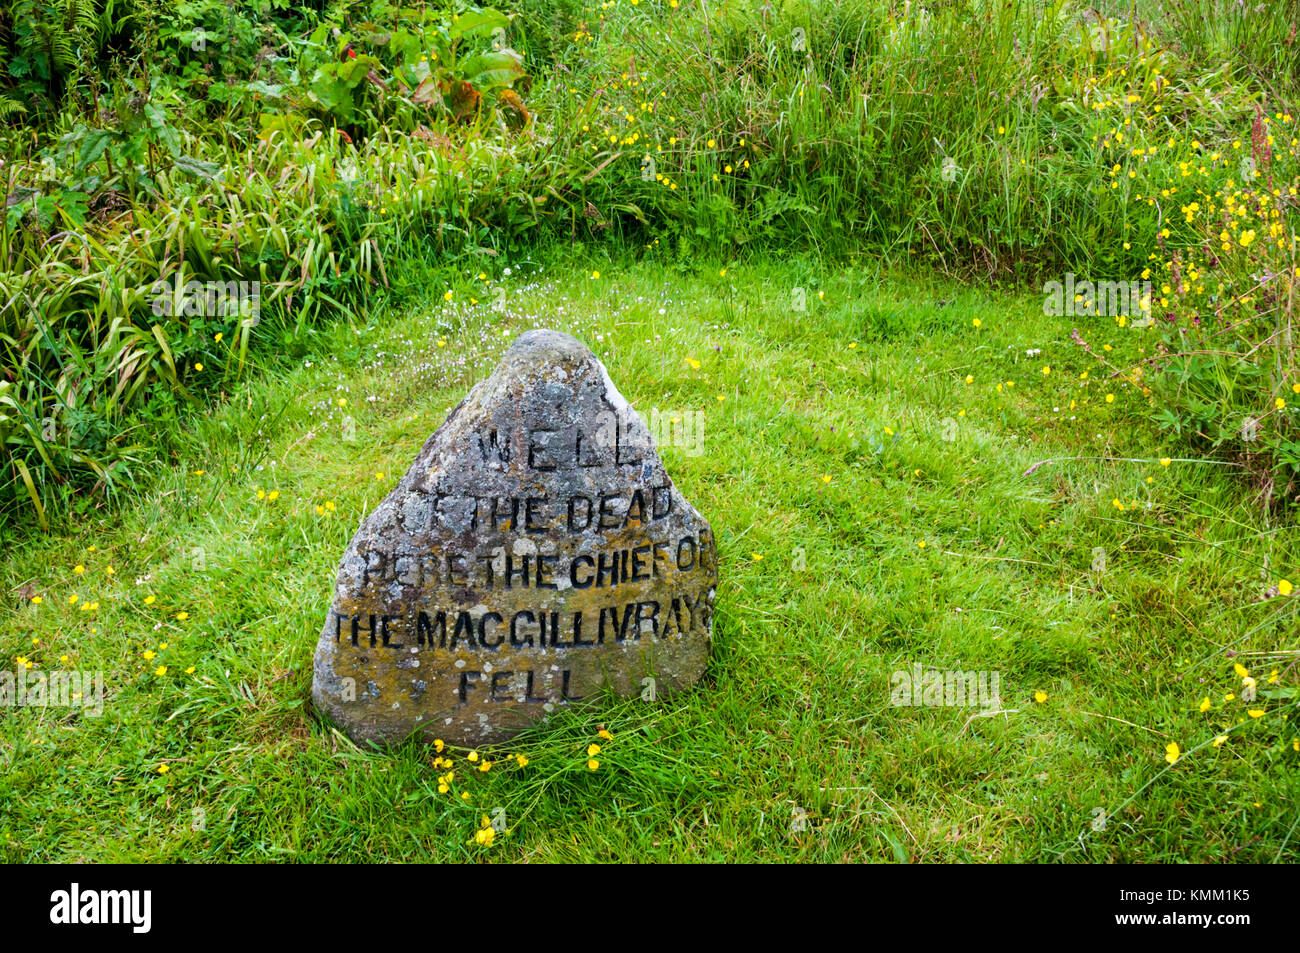 The Well of the Dead on the Culloden battlefield is believed to be where the Chief of the MacGillivray clan fell during the battle. Stock Photo